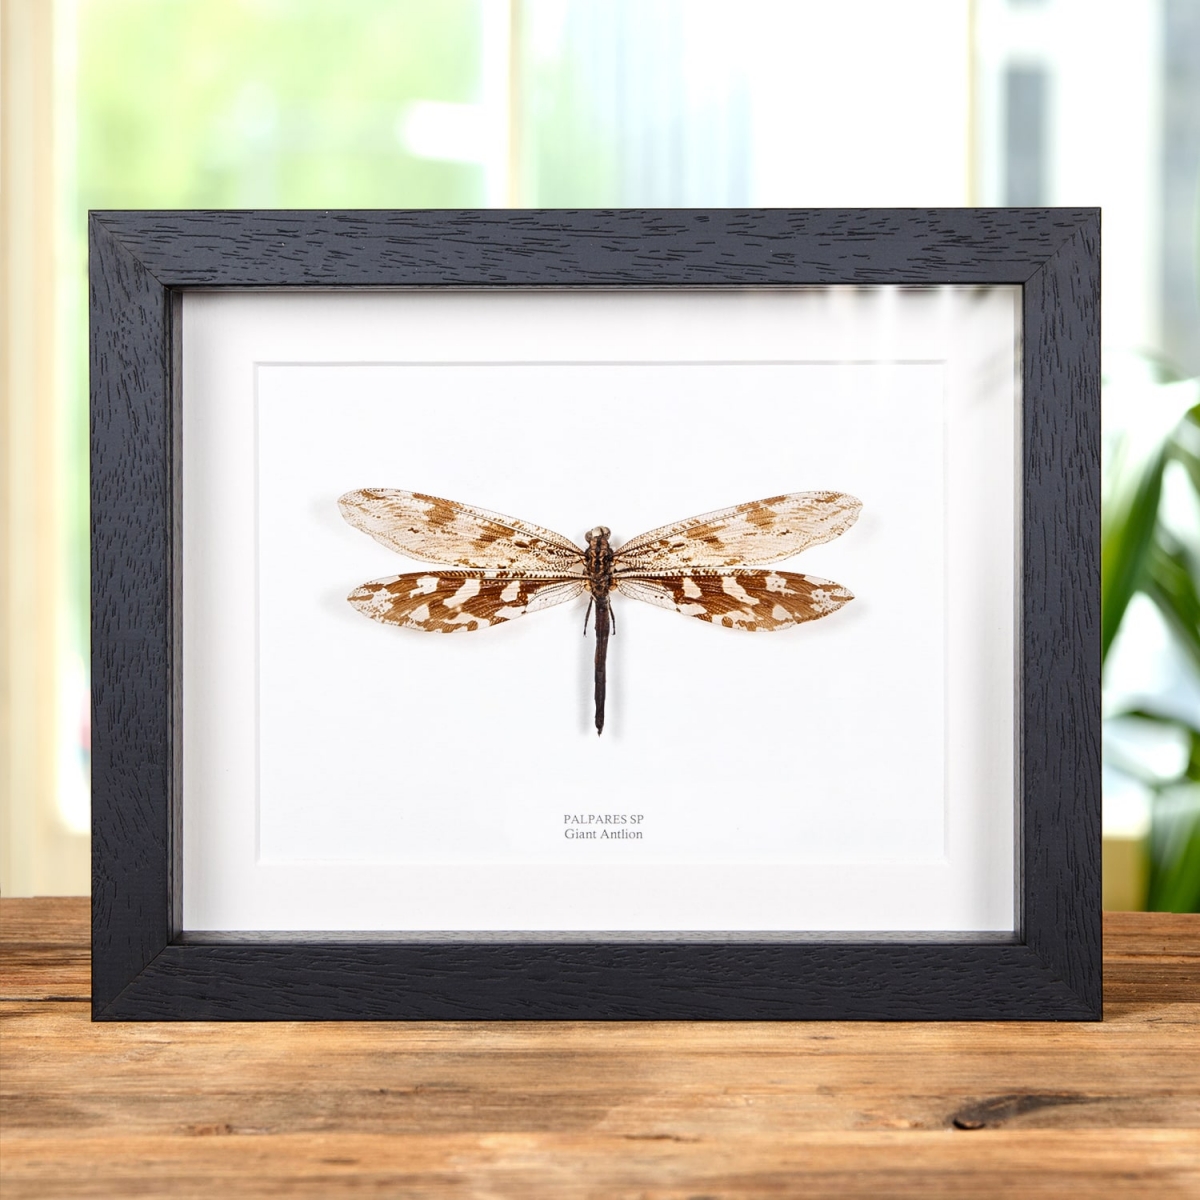 Minibeast Giant Antlion in Box Frame (Palpares sp.)